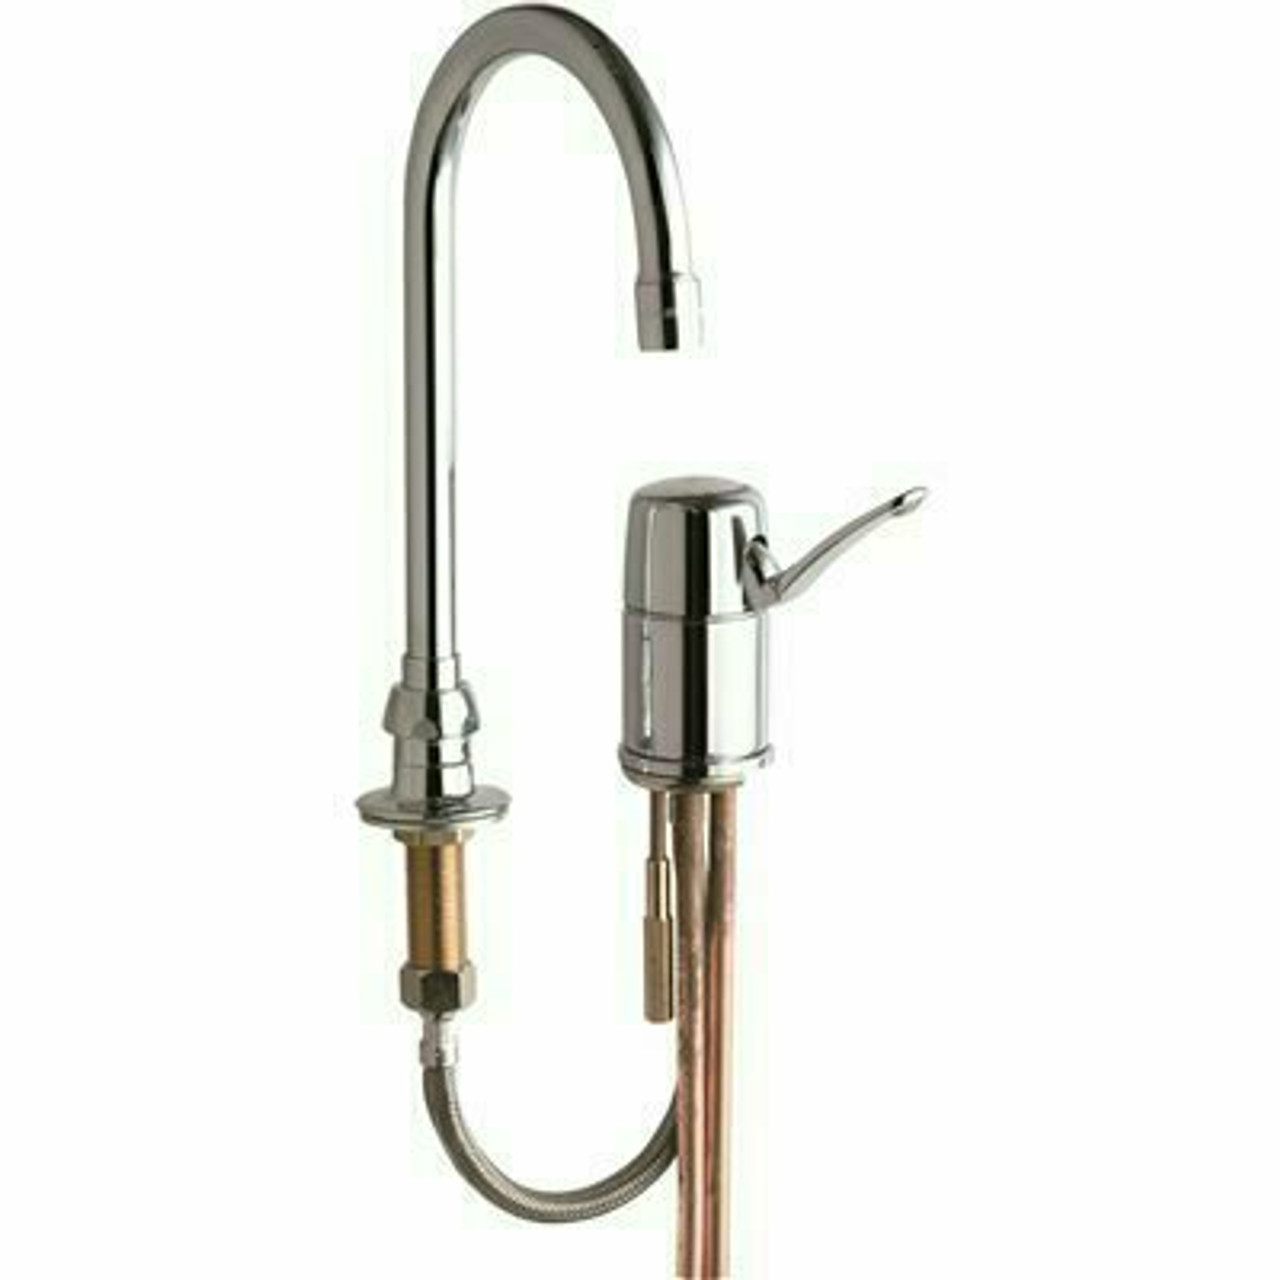 Chicago Faucets 1-Handle High Arc Bathroom Faucet In Chrome With 5-1/4 In. Rigid/Swing Gooseneck Spout